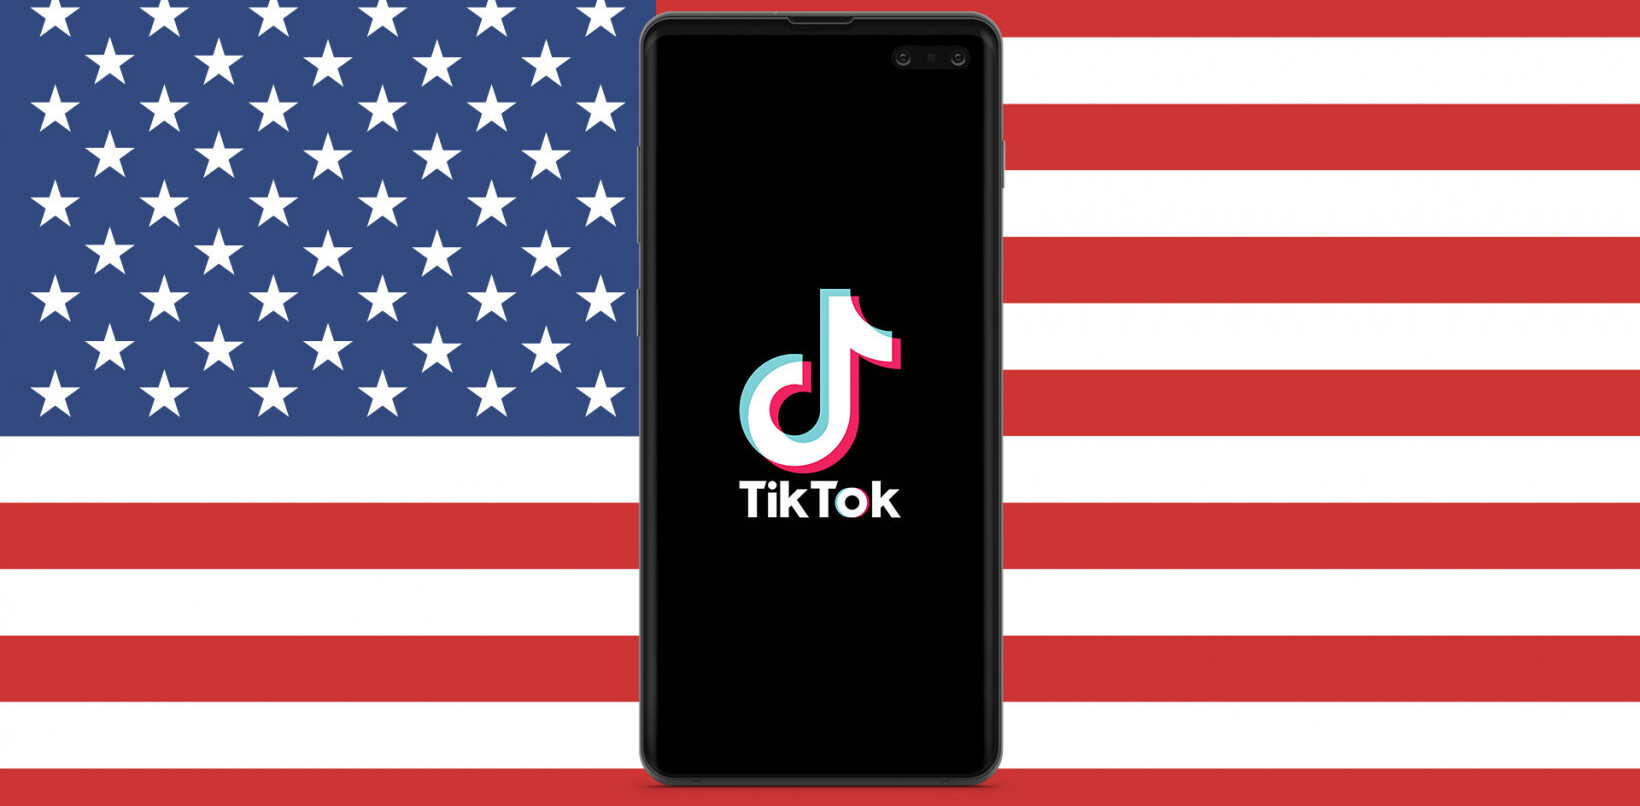 TikTok might be sold to US investors to ward off security concerns